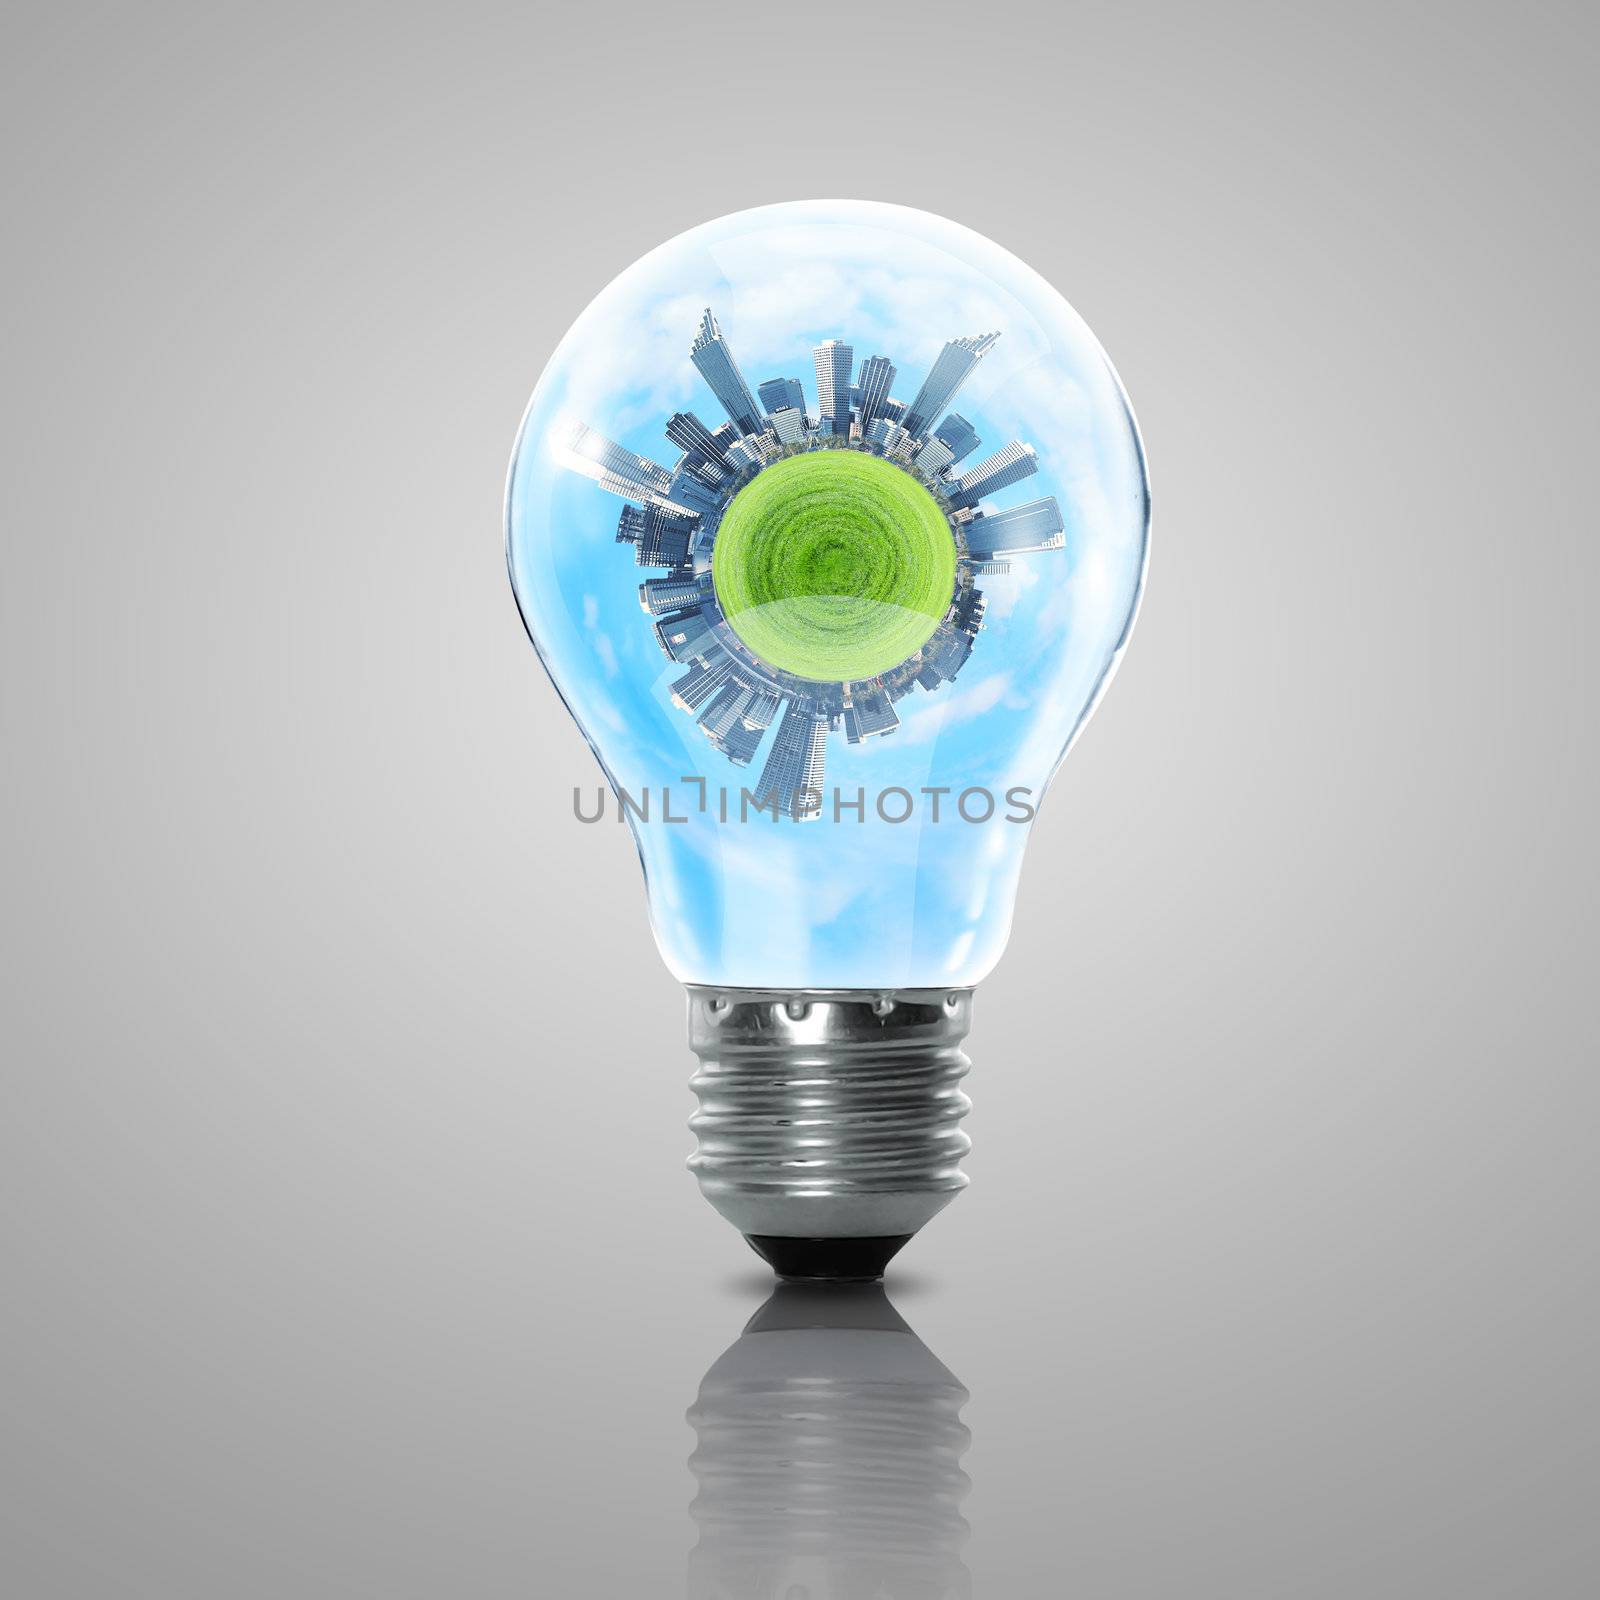 Electric light bulb and planet inside it by sergey_nivens